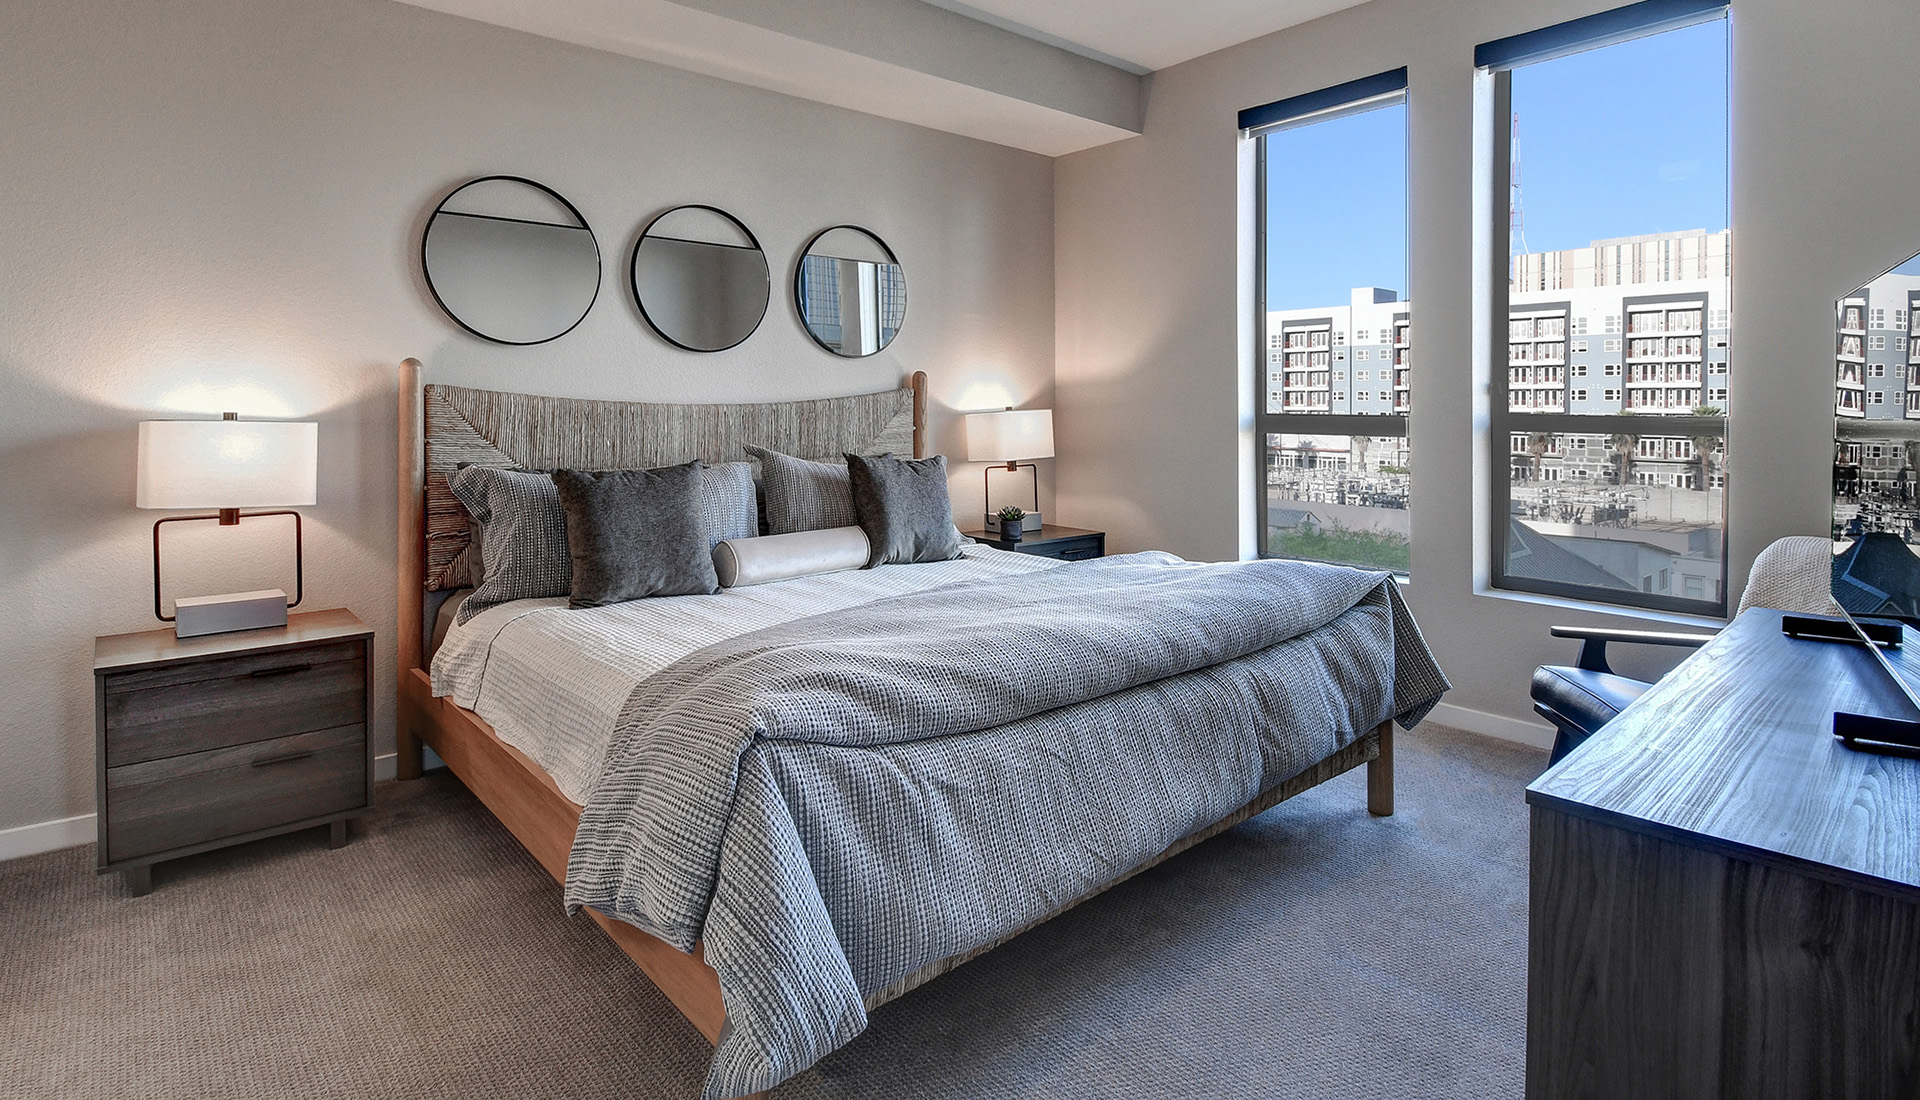 Bedroom with king-sized bed, wood bed frame and headboard, white and gray blankets and pillows, and views of community through windows